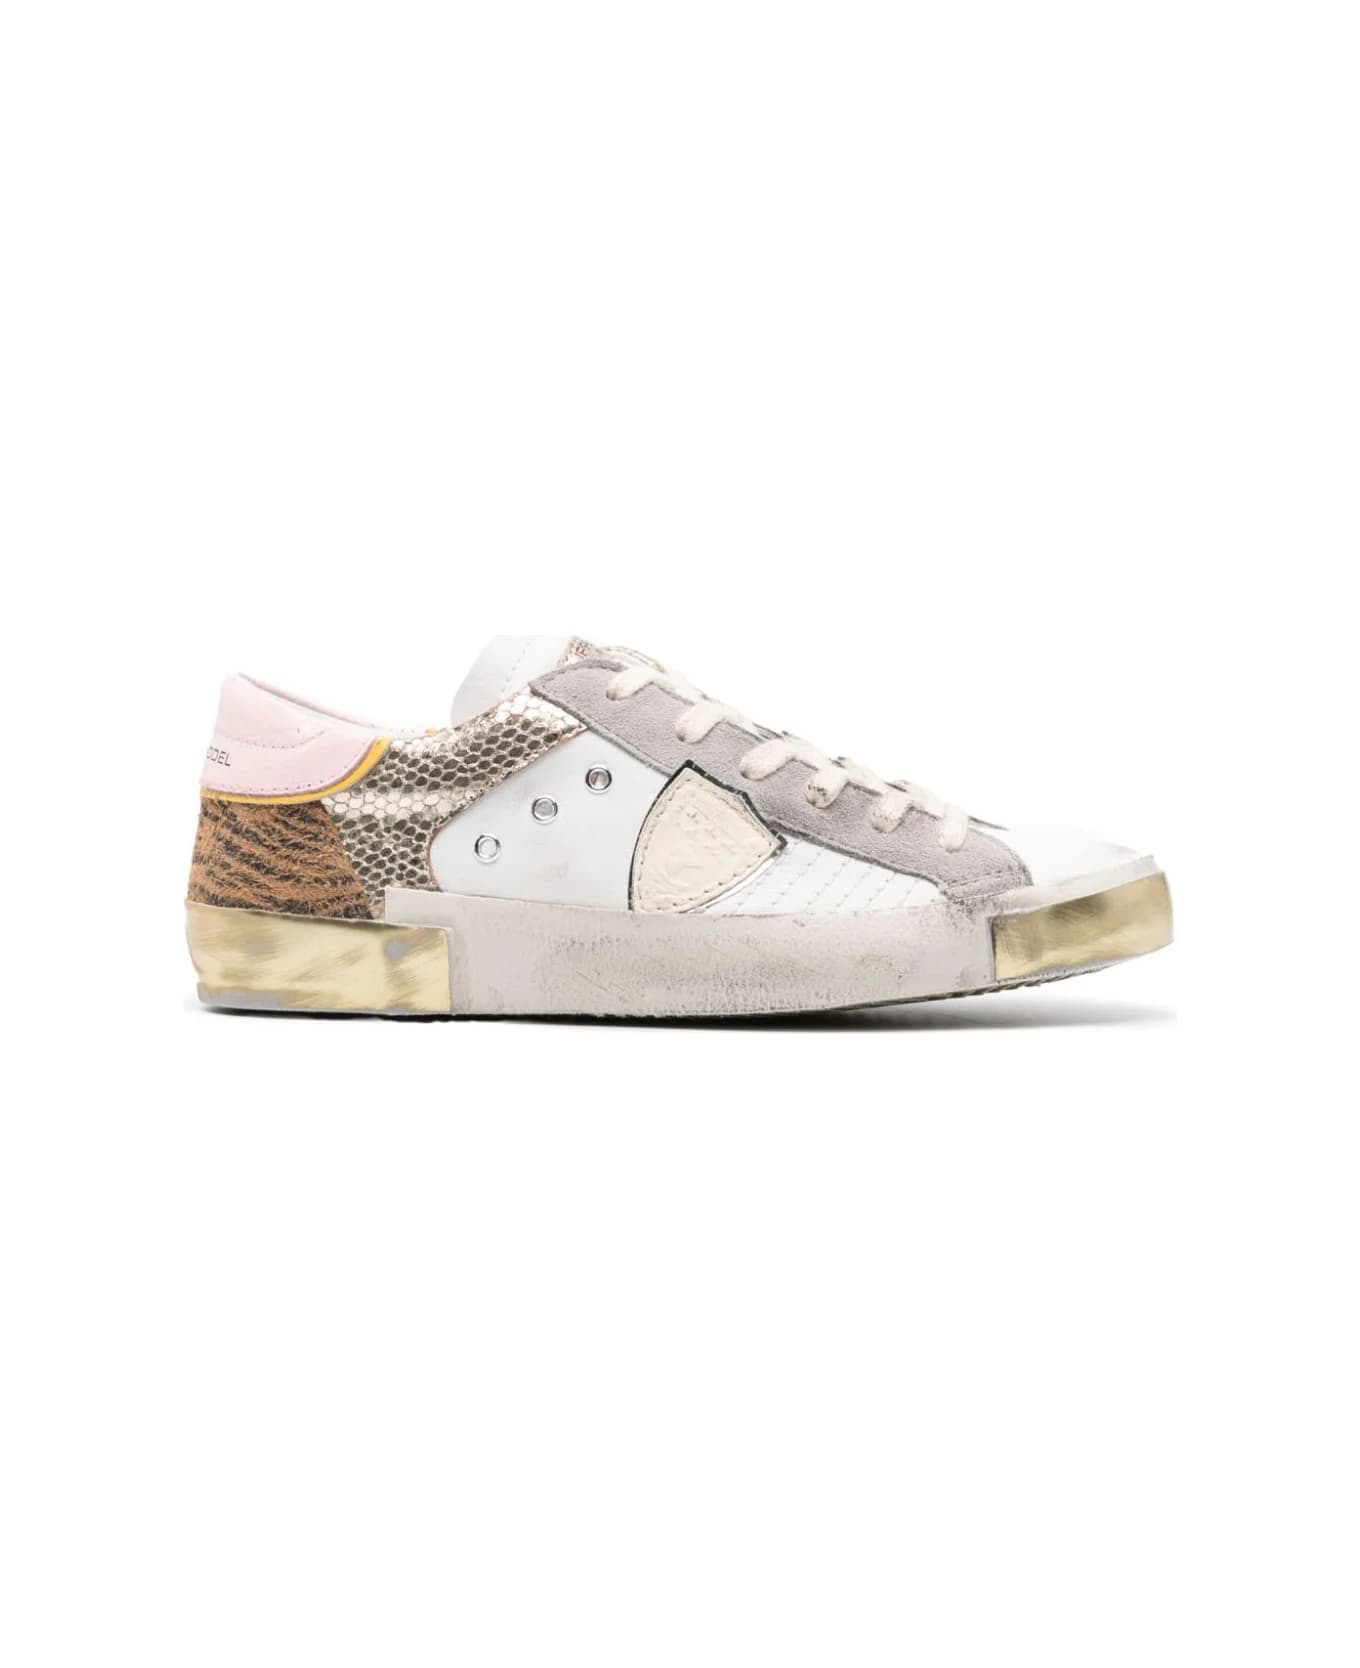 Philippe Model Prsx Low Sneakers - White, Animalier And Gold